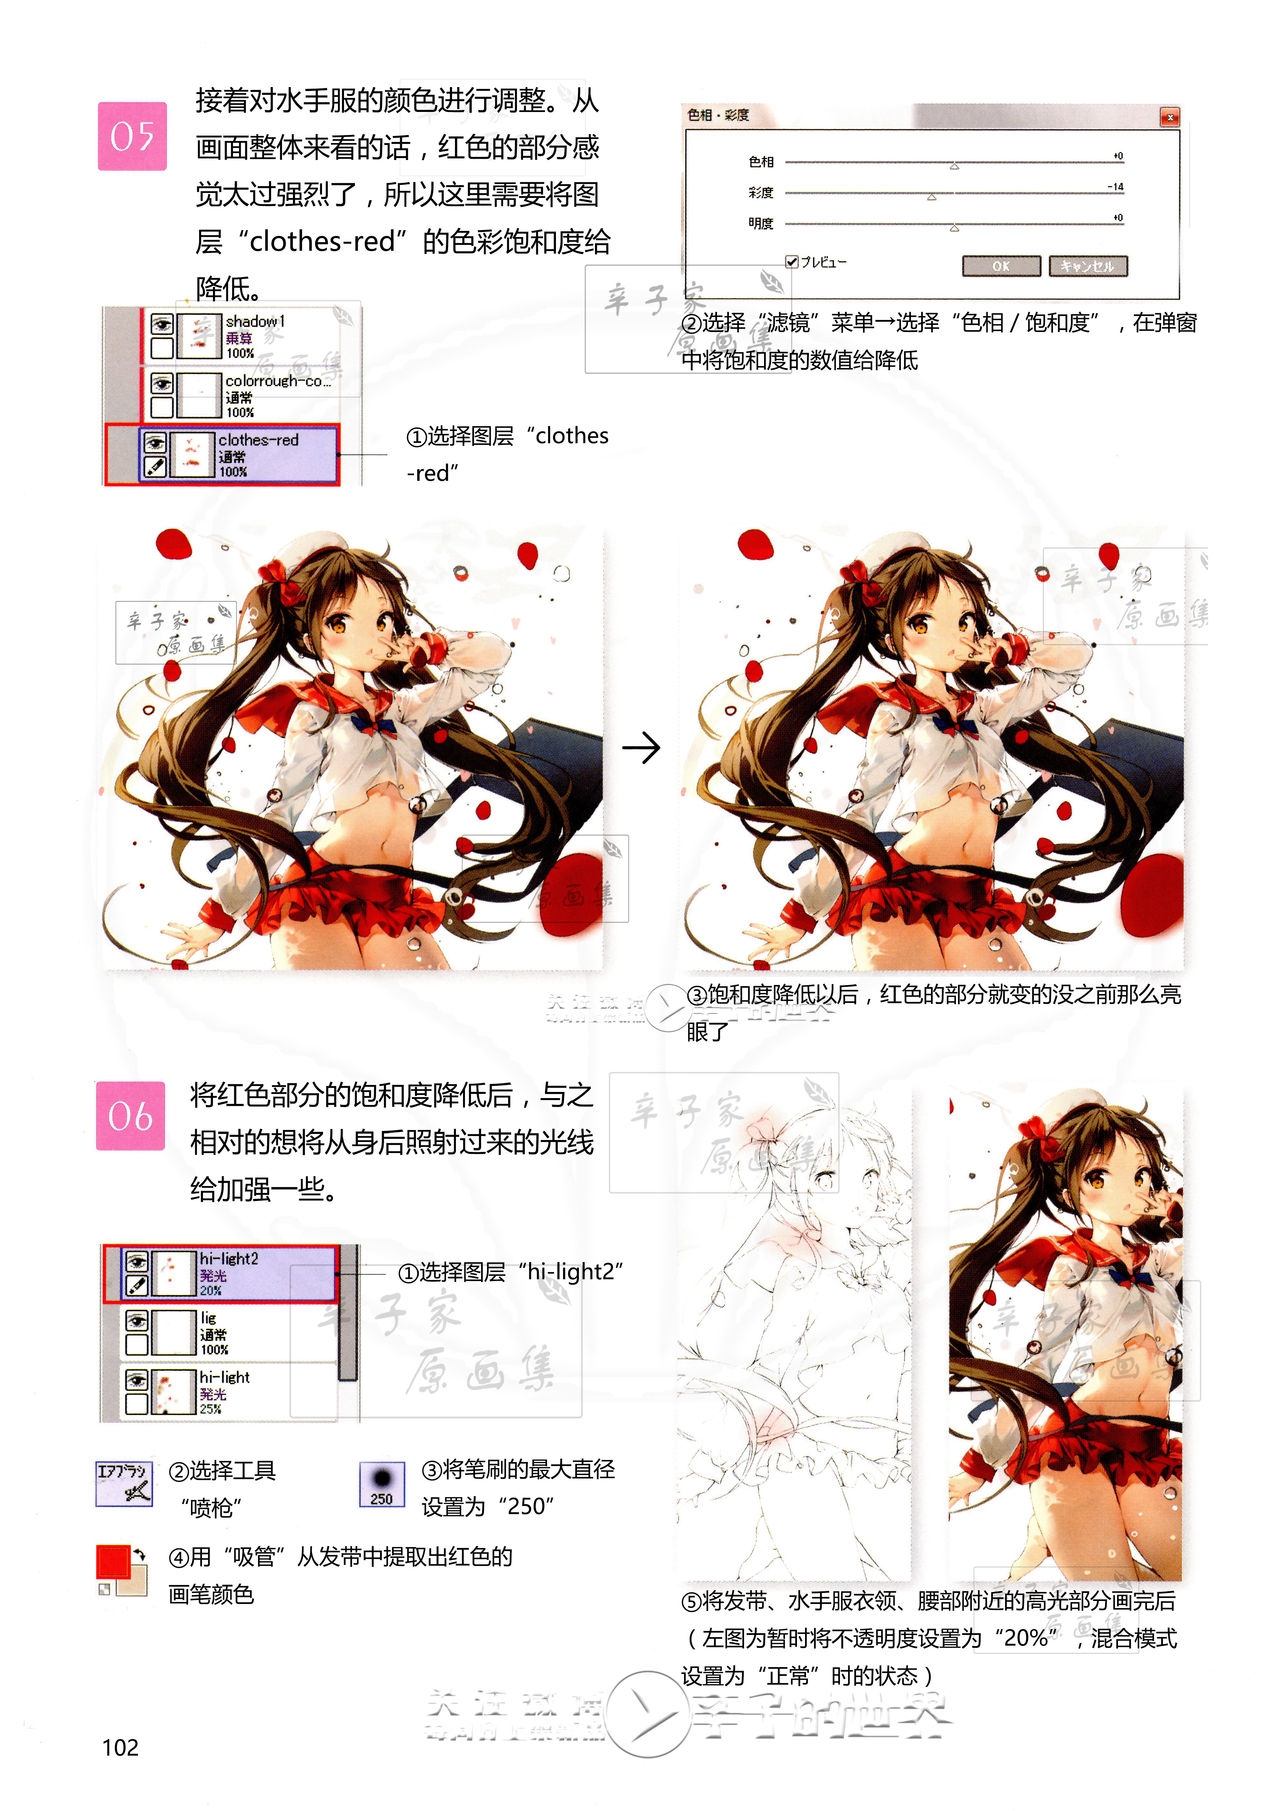 [Anmi] Lets Make ★ Character CG illustration techniques vol.9 [Chinese] 100